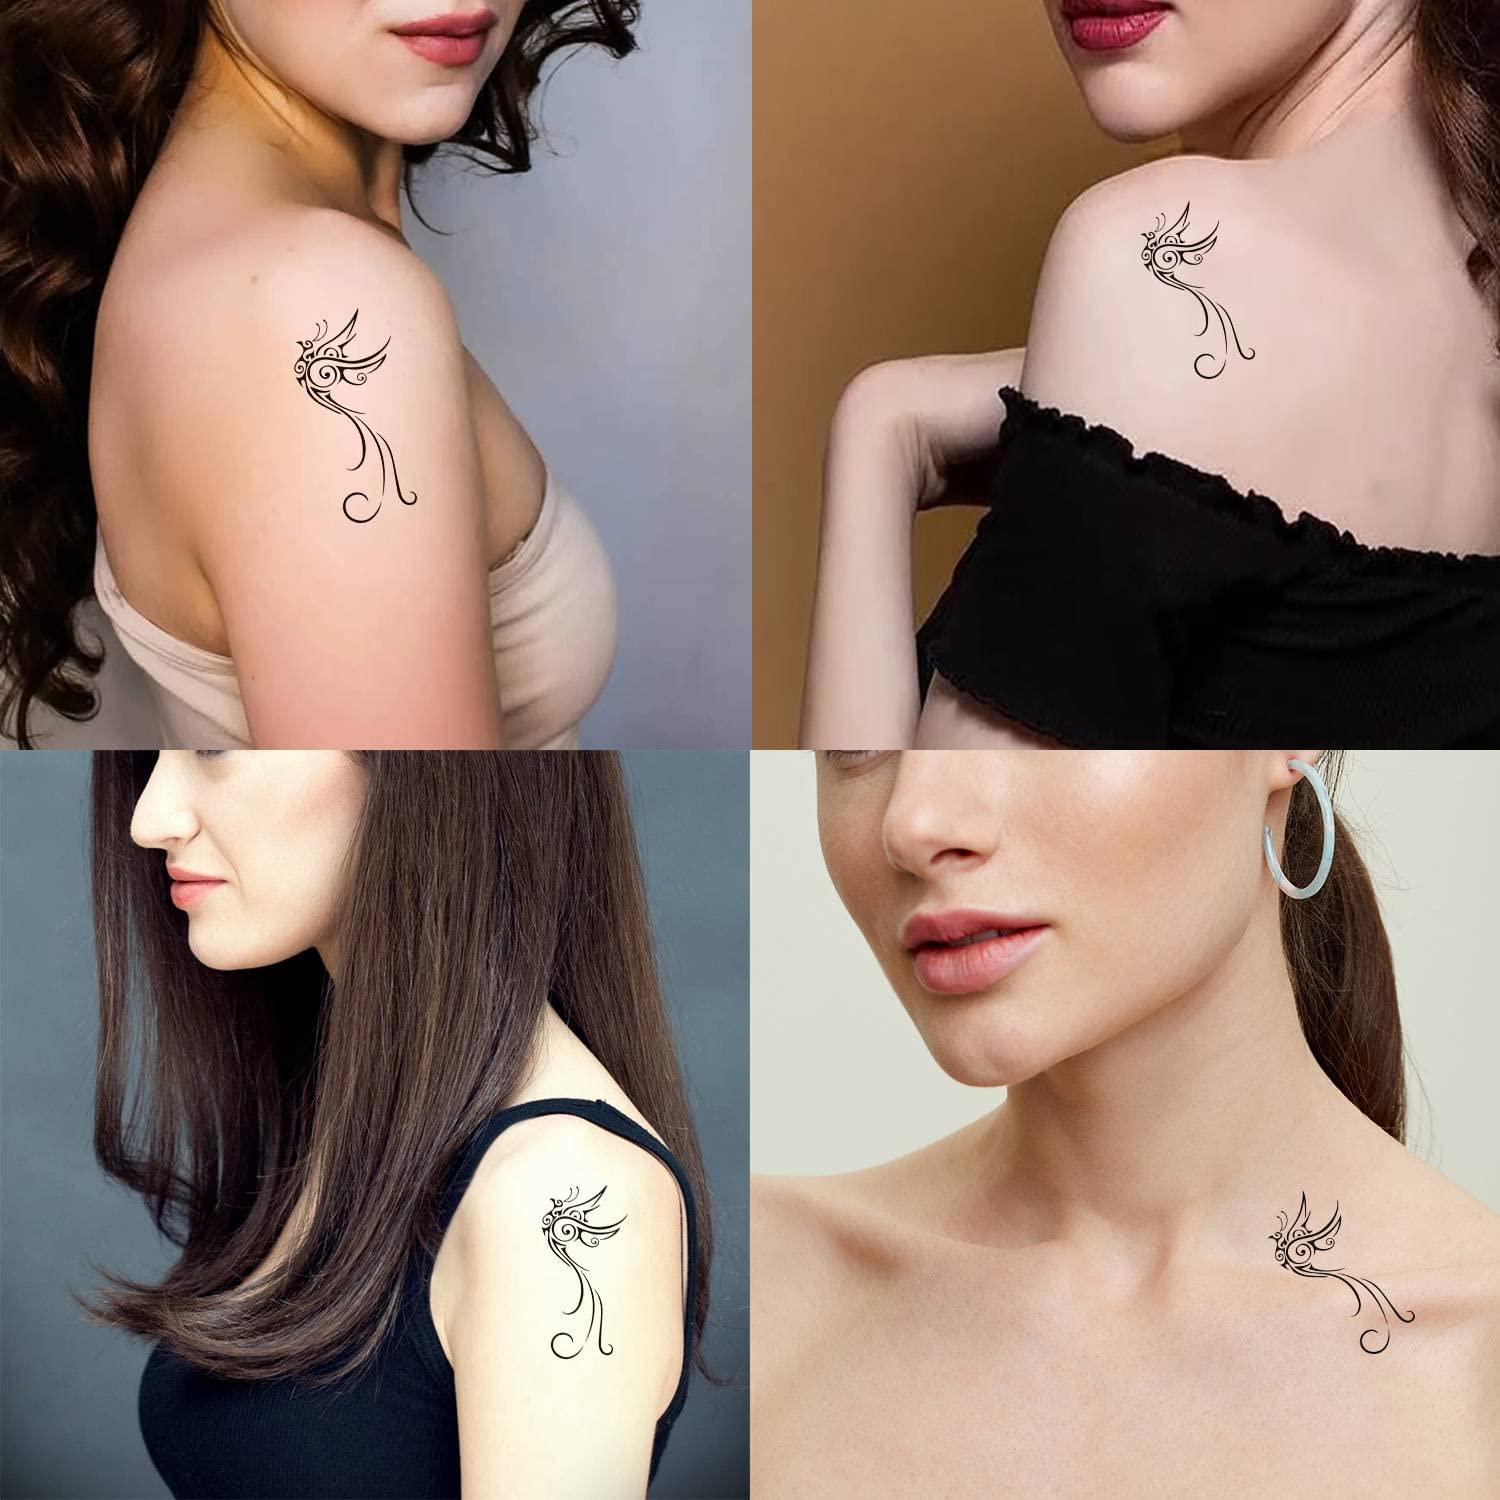 Baby Tattoo Ideas For Parents | POPSUGAR Family